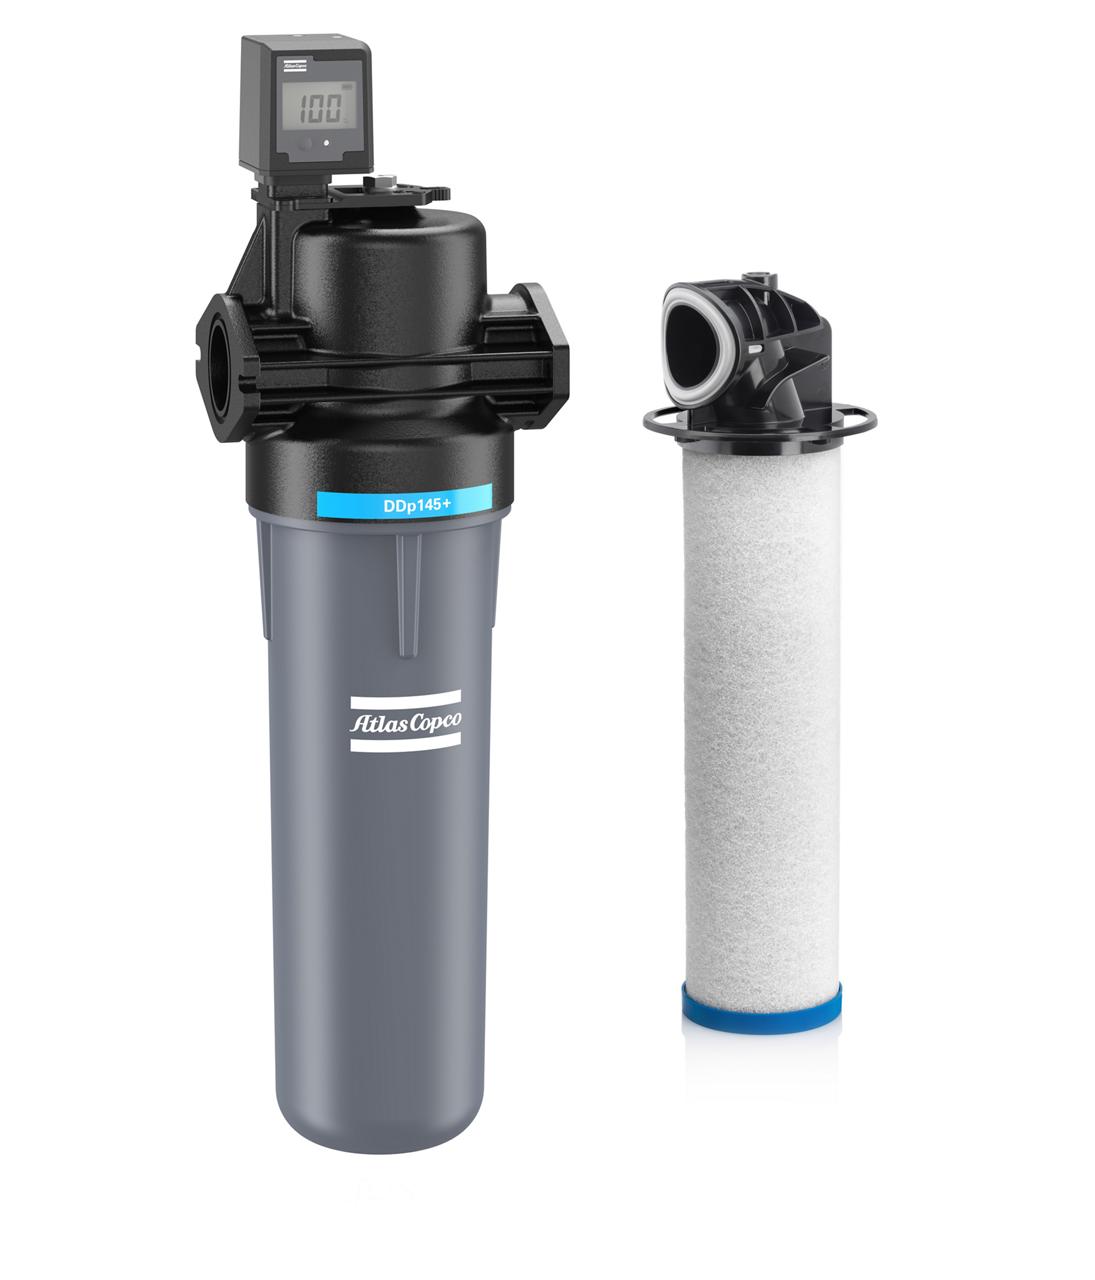 DDp145+ Next generation compressed air filters